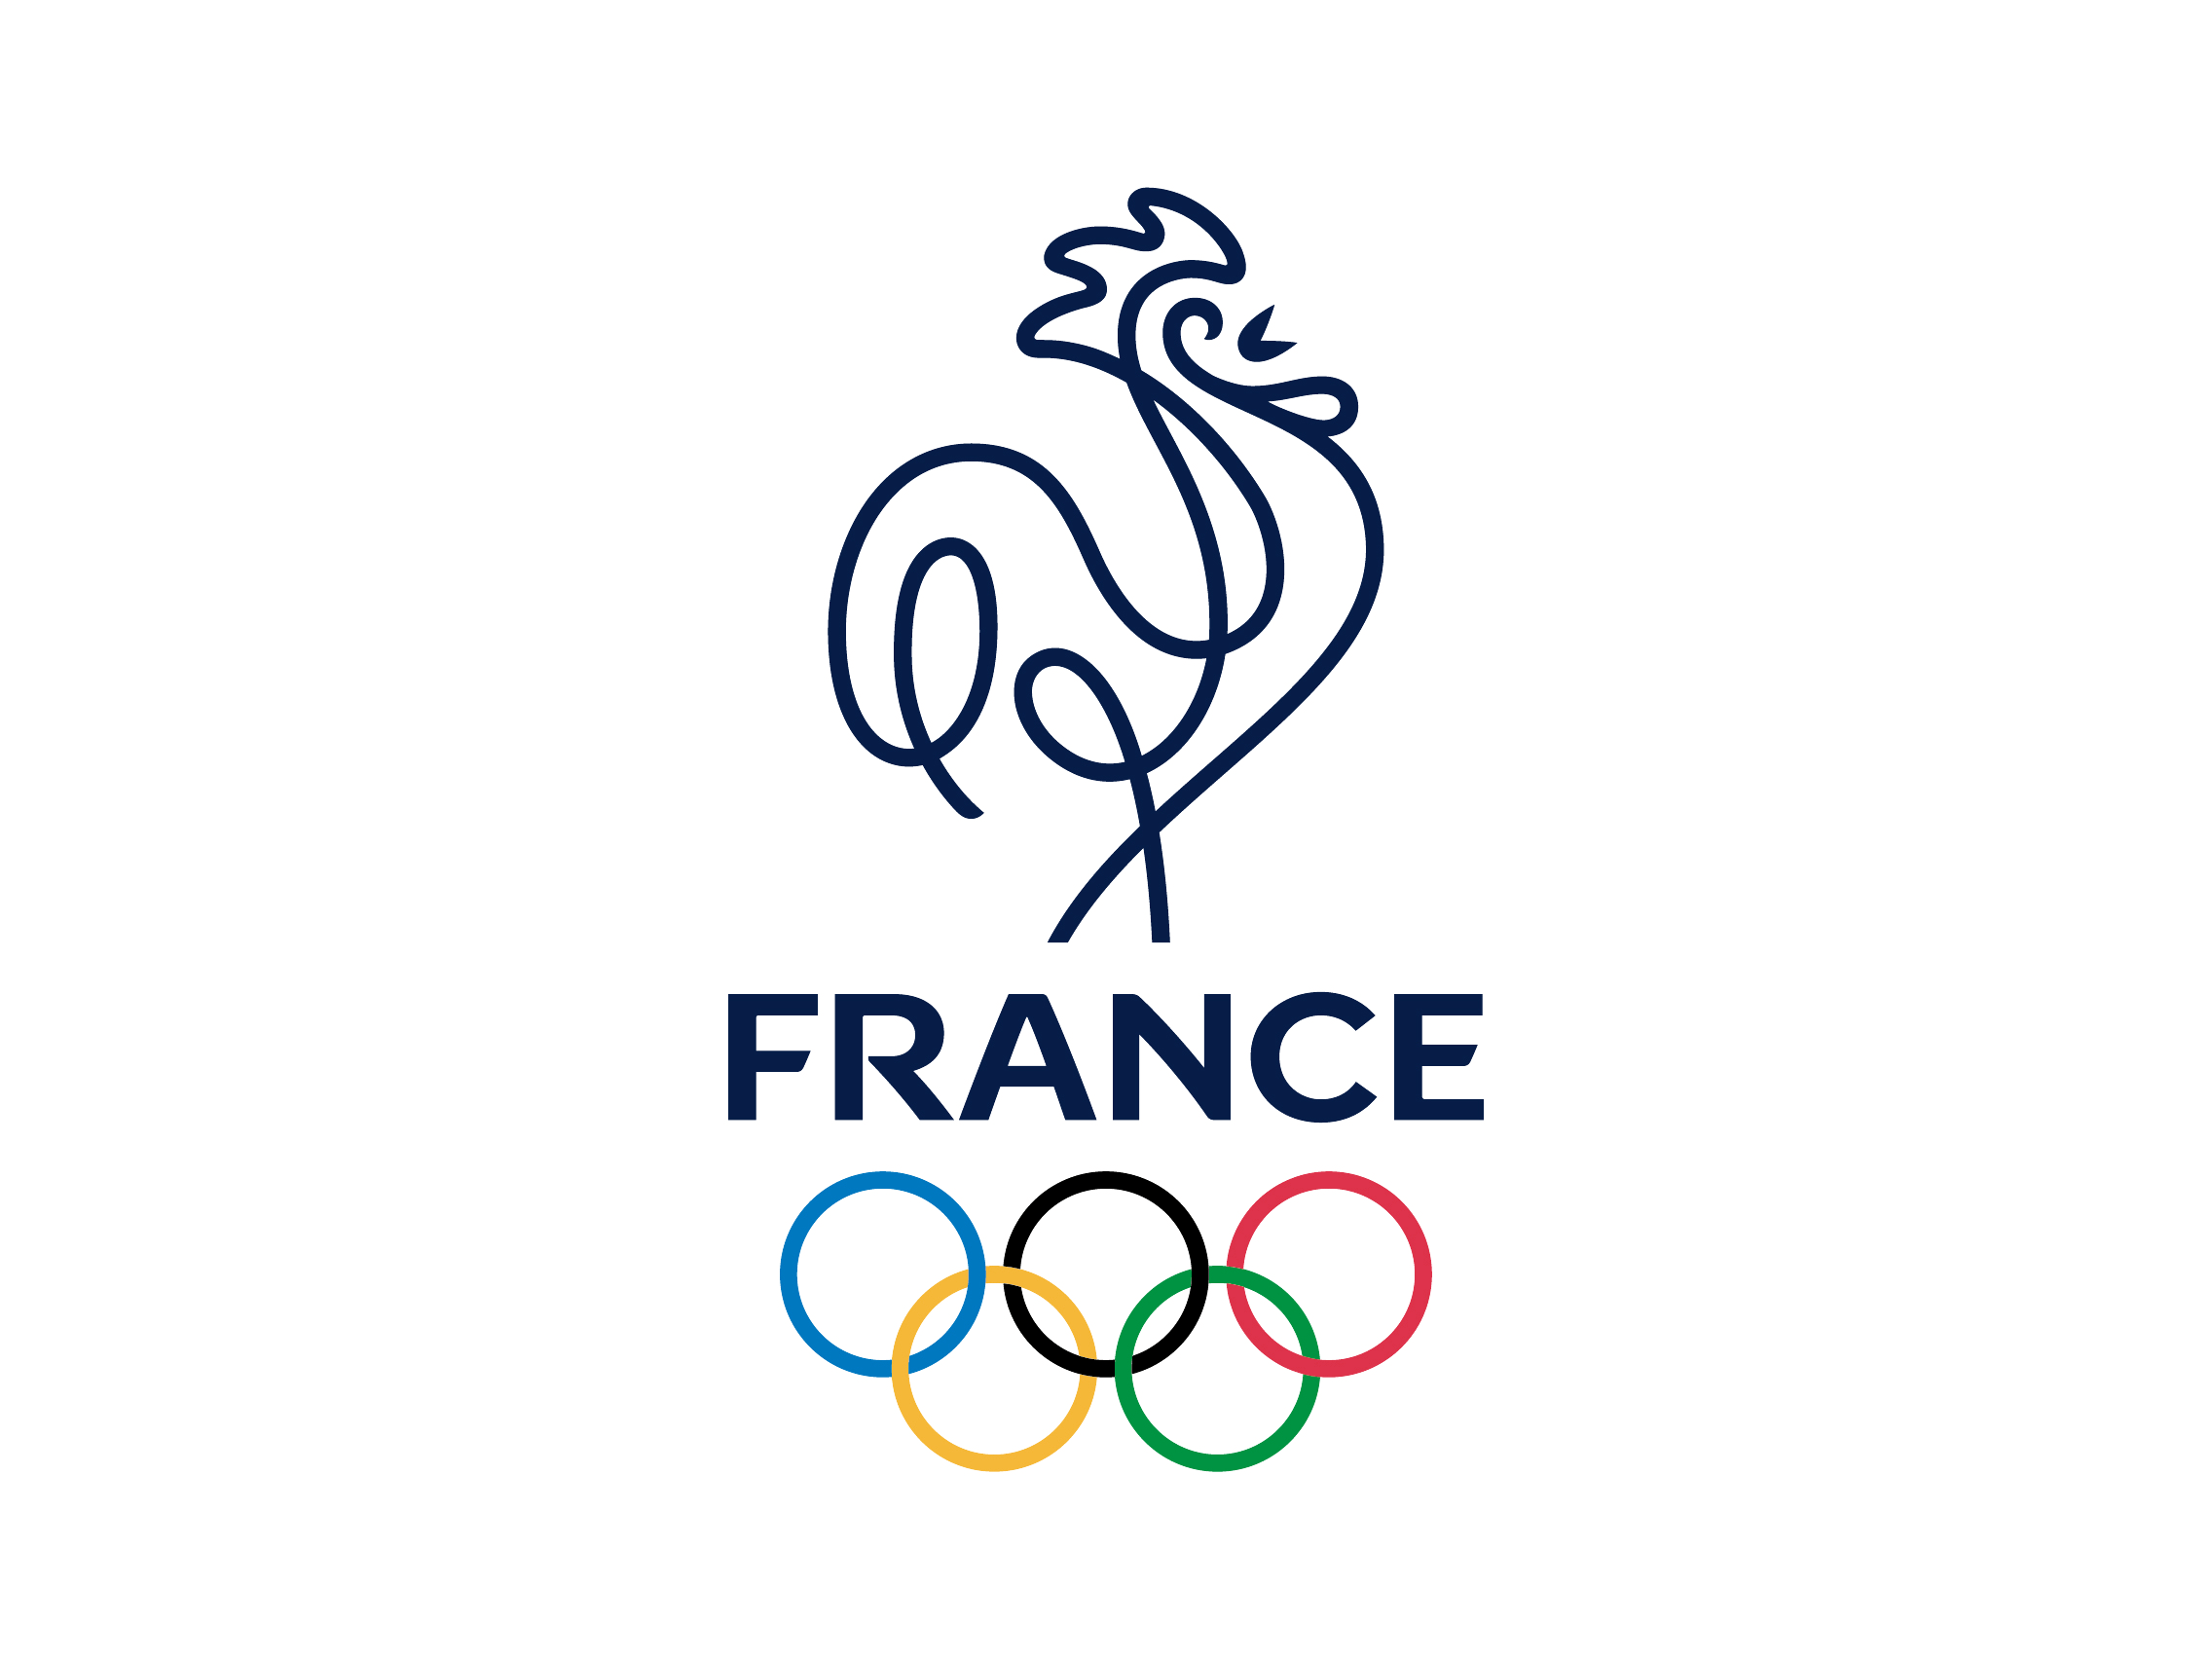 French Logo - CNOSF French Olympic Committee logo